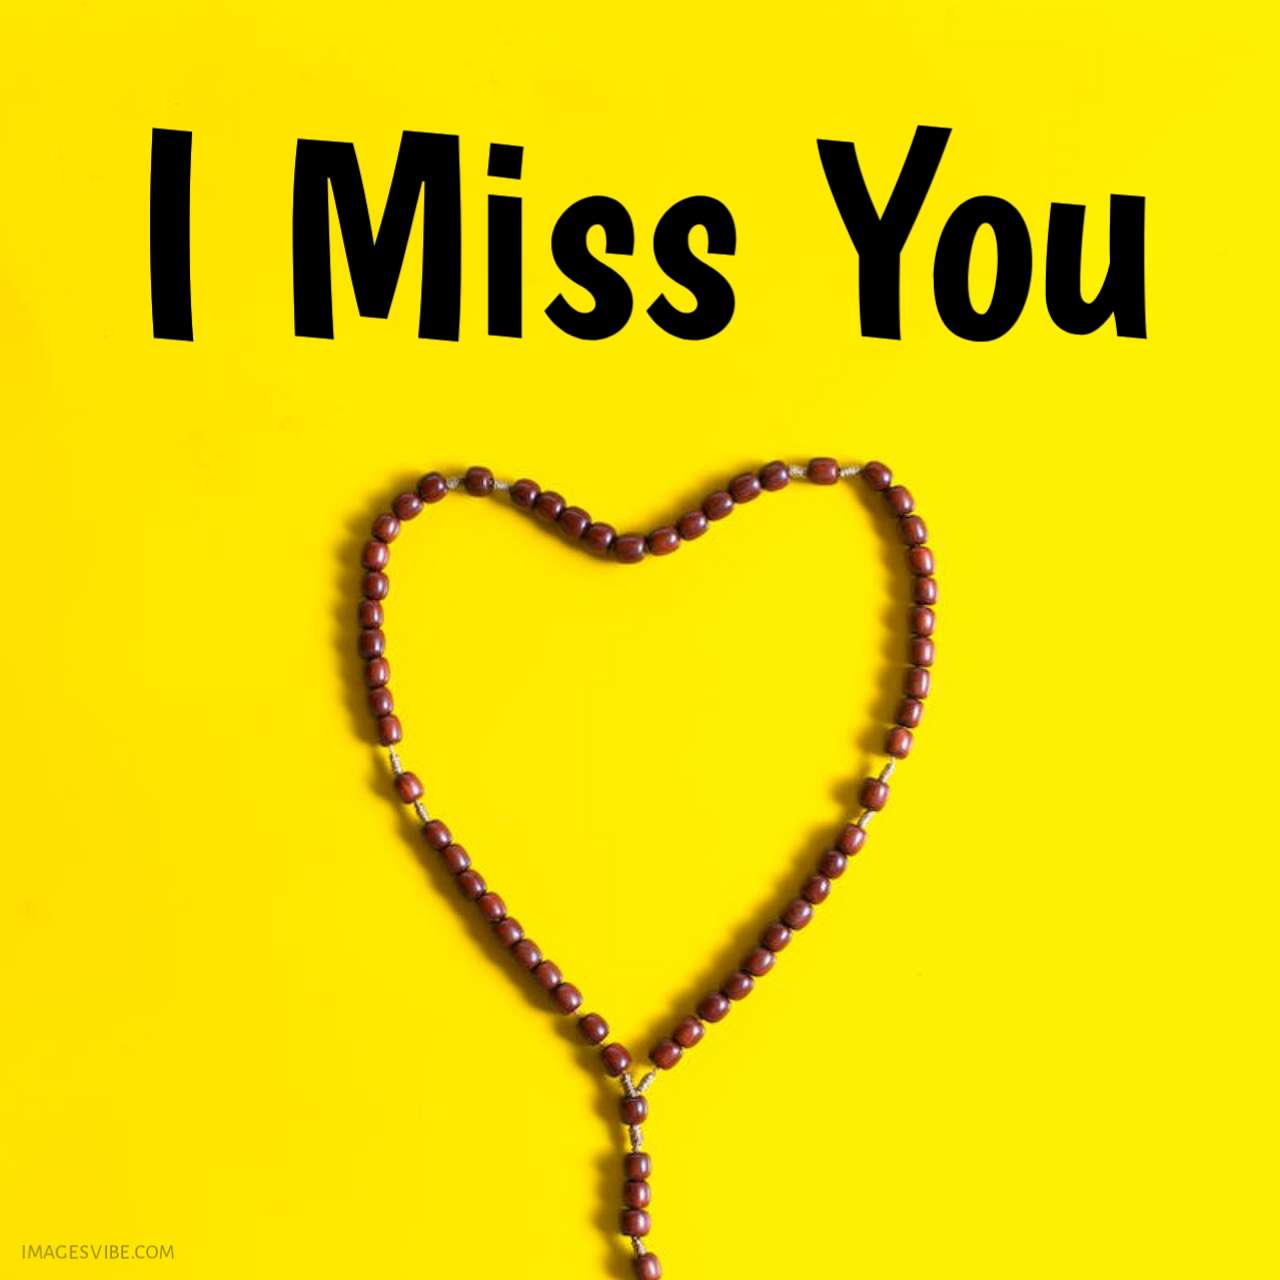 I Miss You Images16 